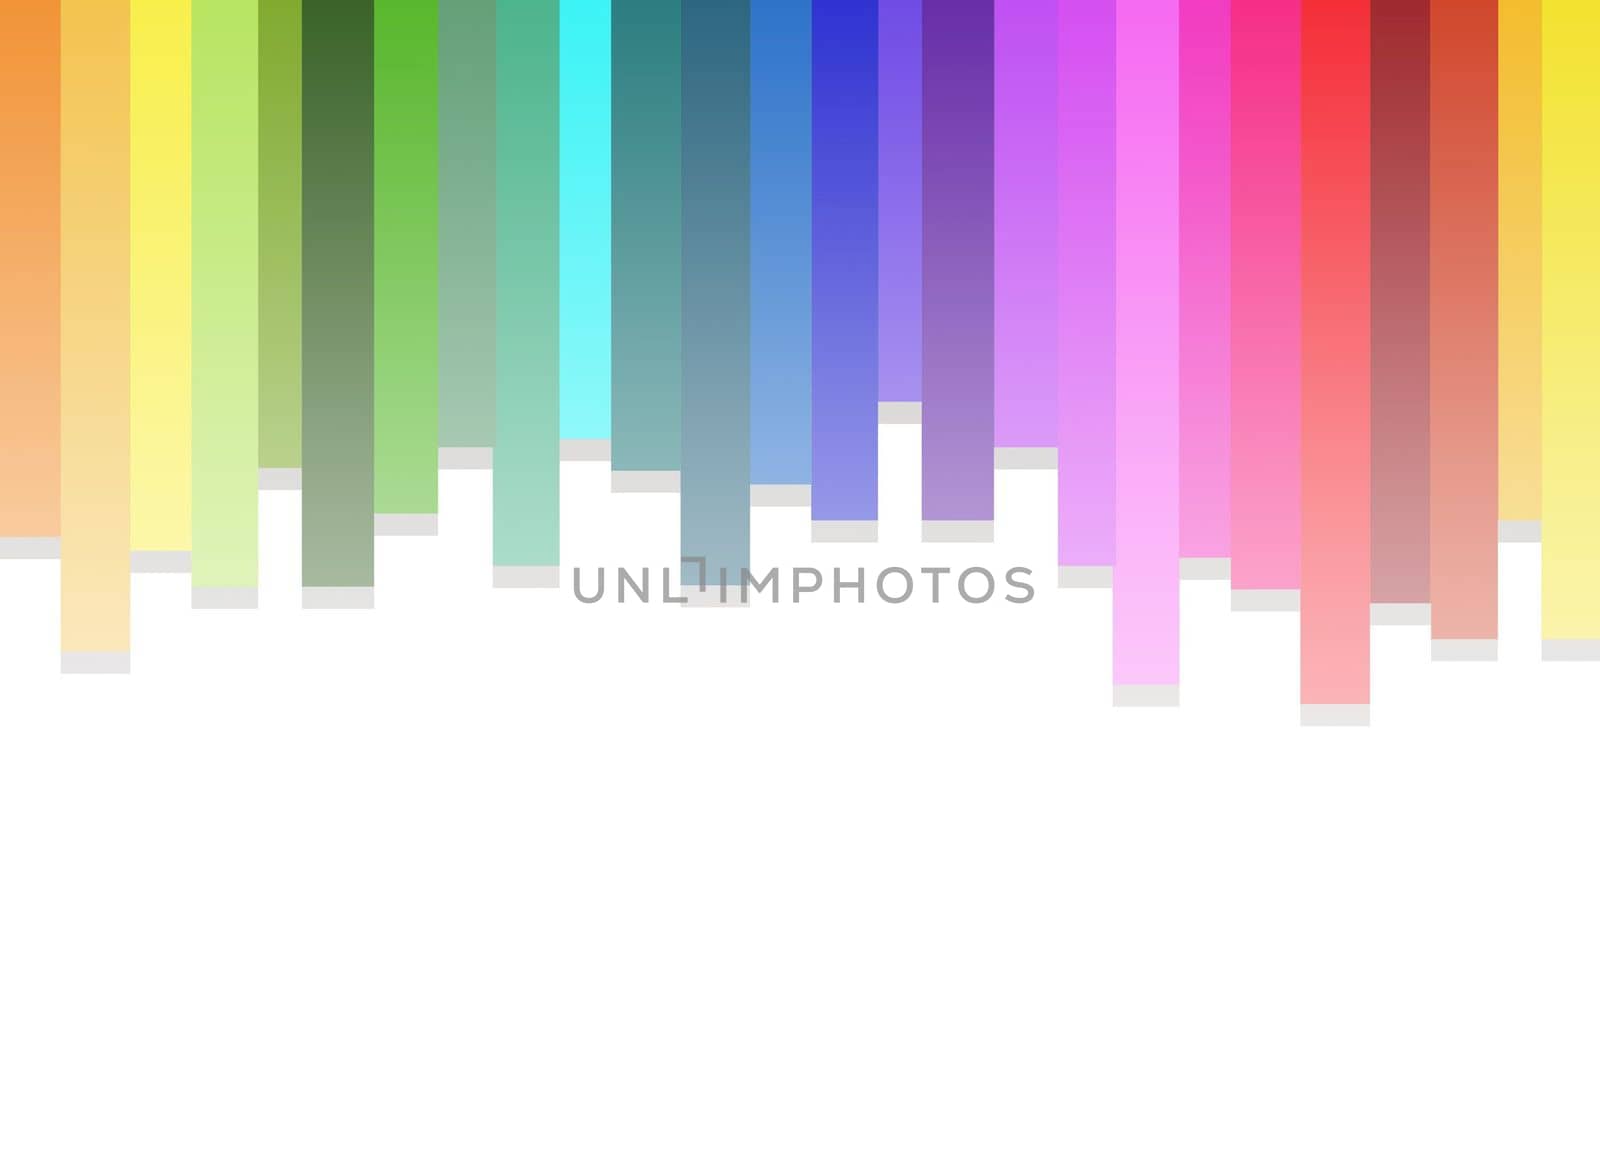 Colorful spectrum background, rainbow abstract